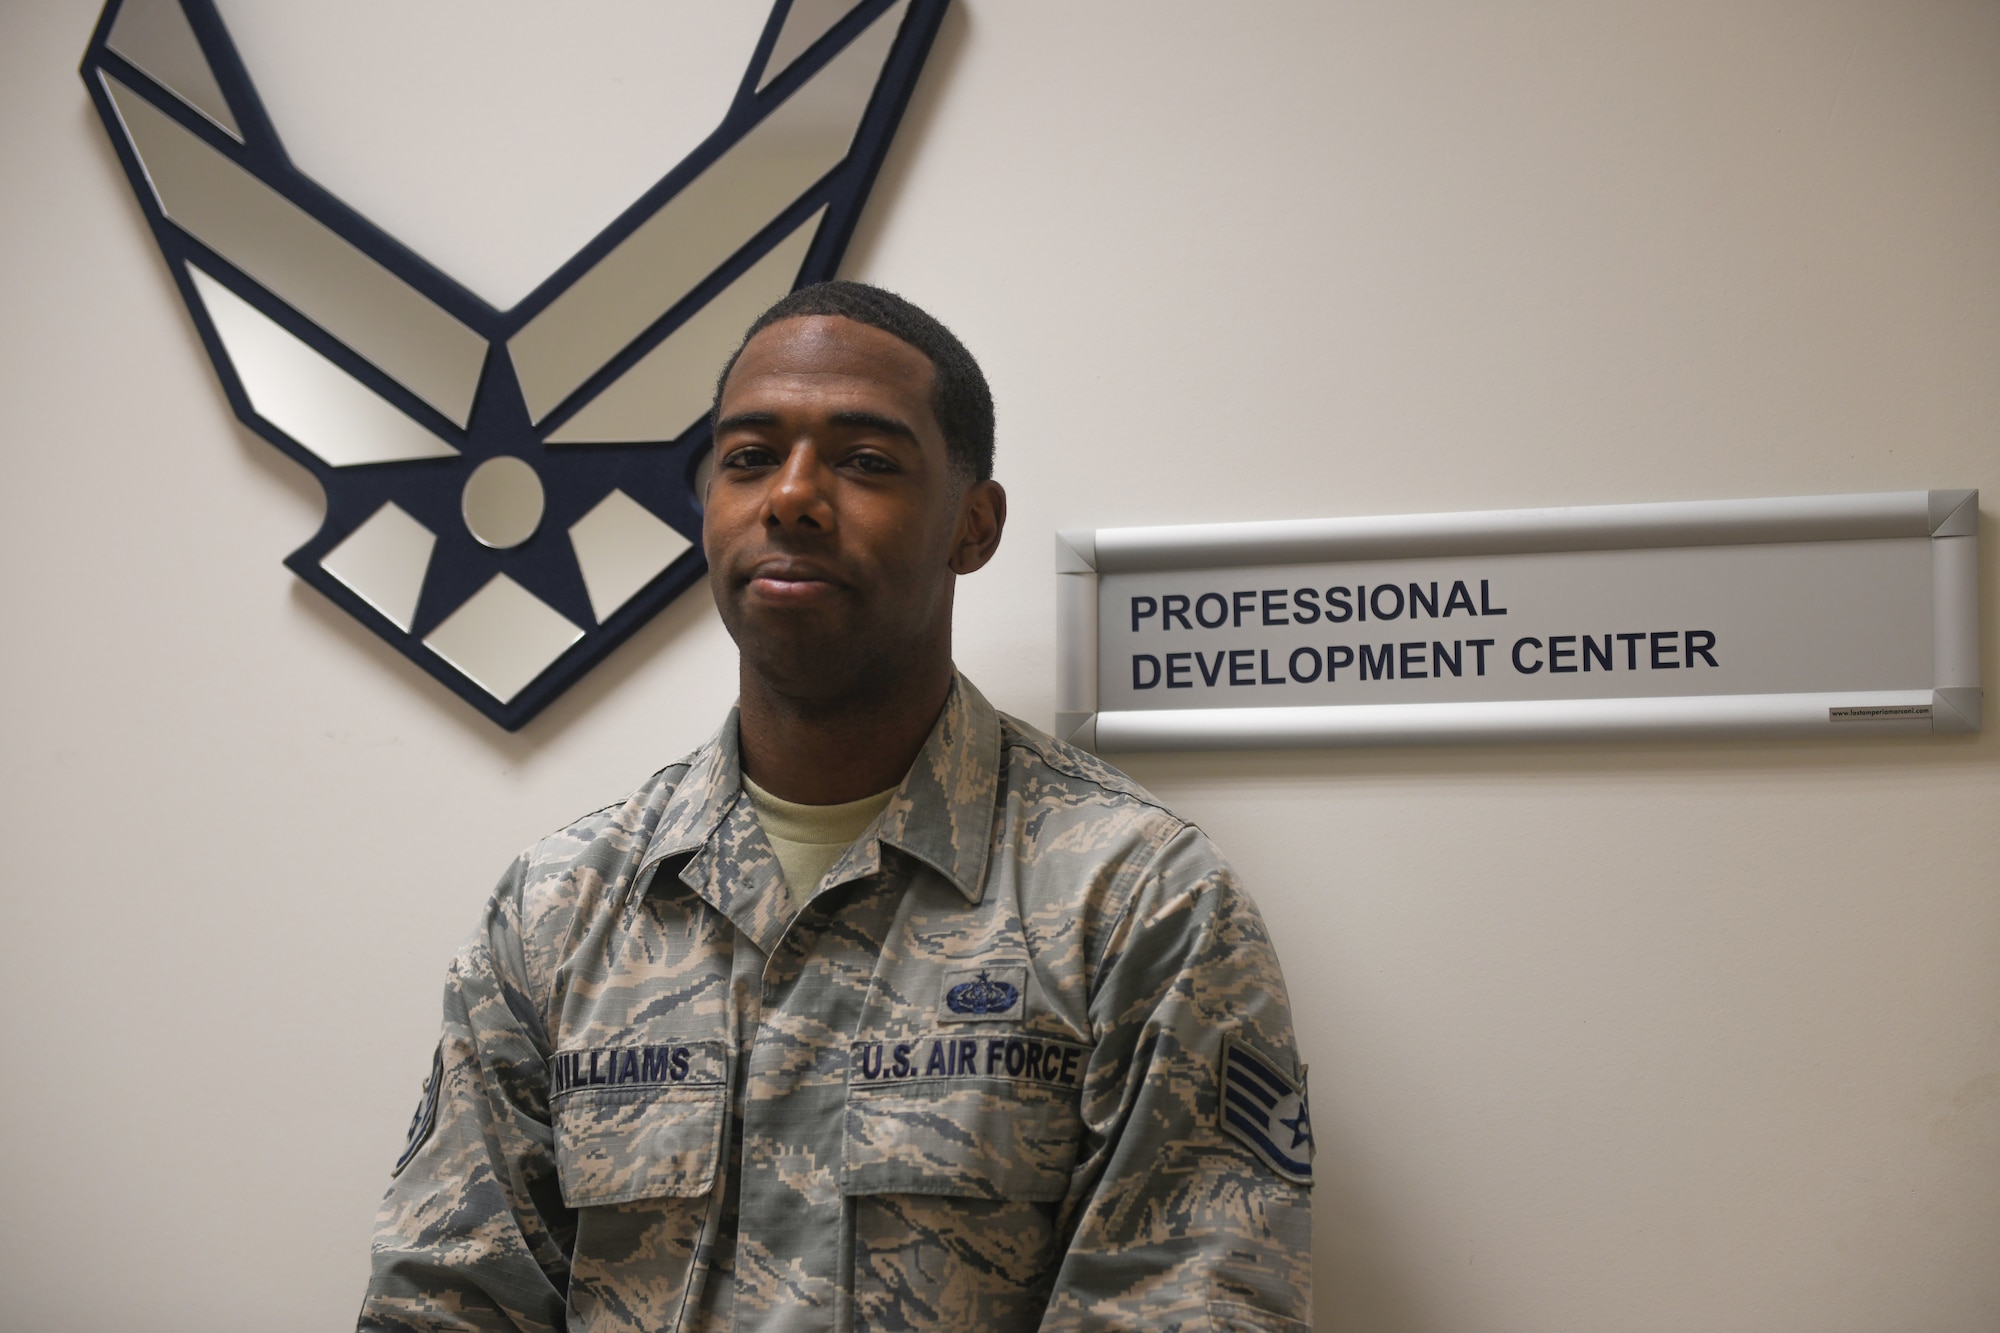 U.S. Air Force Staff Sgt. Daavid Williams, the 31st Force Support Squadron First Term Airmen Course team lead, poses for a photo, Sept. 25, 2019, at Aviano Air Base, Italy. The 31st FSS is the 31st Fighter Wing's largest and most diverse squadron, comprised of more than 600 military and civilian personnel whose primary mission is to enhance combat capability, readiness, and quality of life for a community of nearly 10,000 military members, DoD civilians, local national employees, and dependents. (U.S. Air Force photo by Airman 1st Class Ericka A. Woolever).